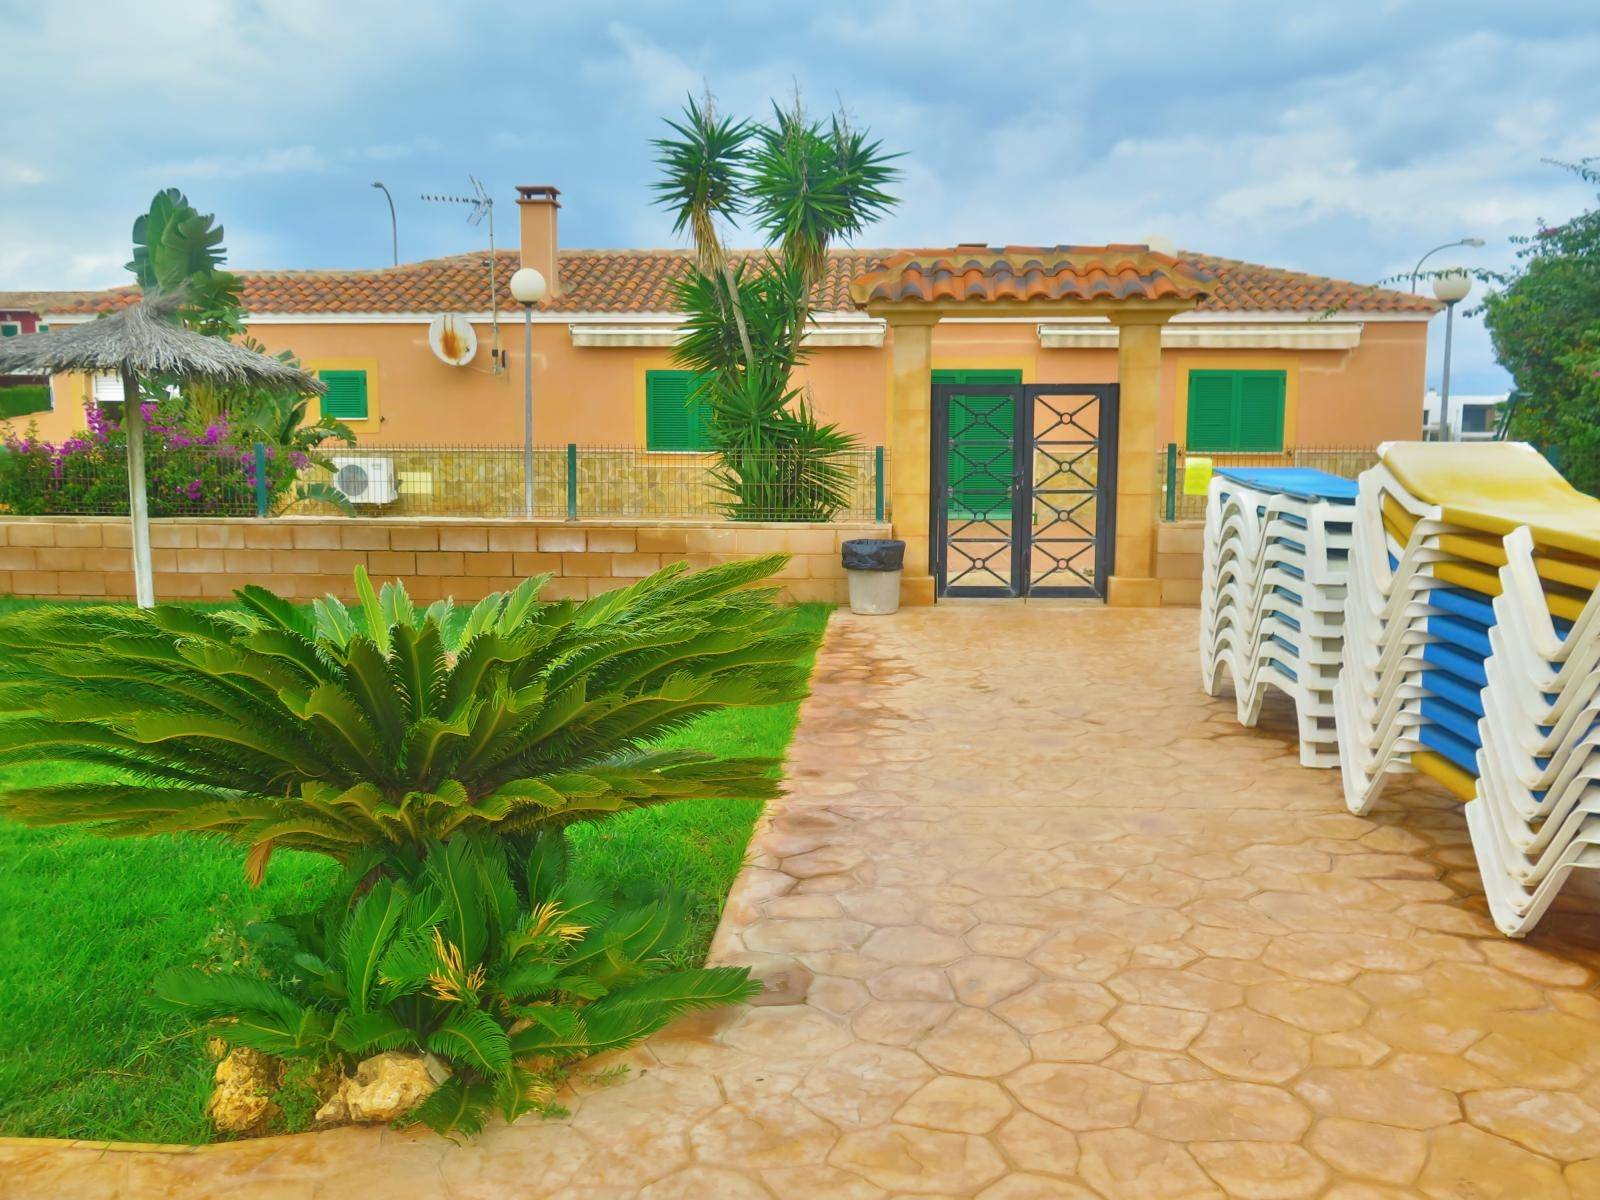 Bungalow for rent Cala murada with communal pool and jacuzzi